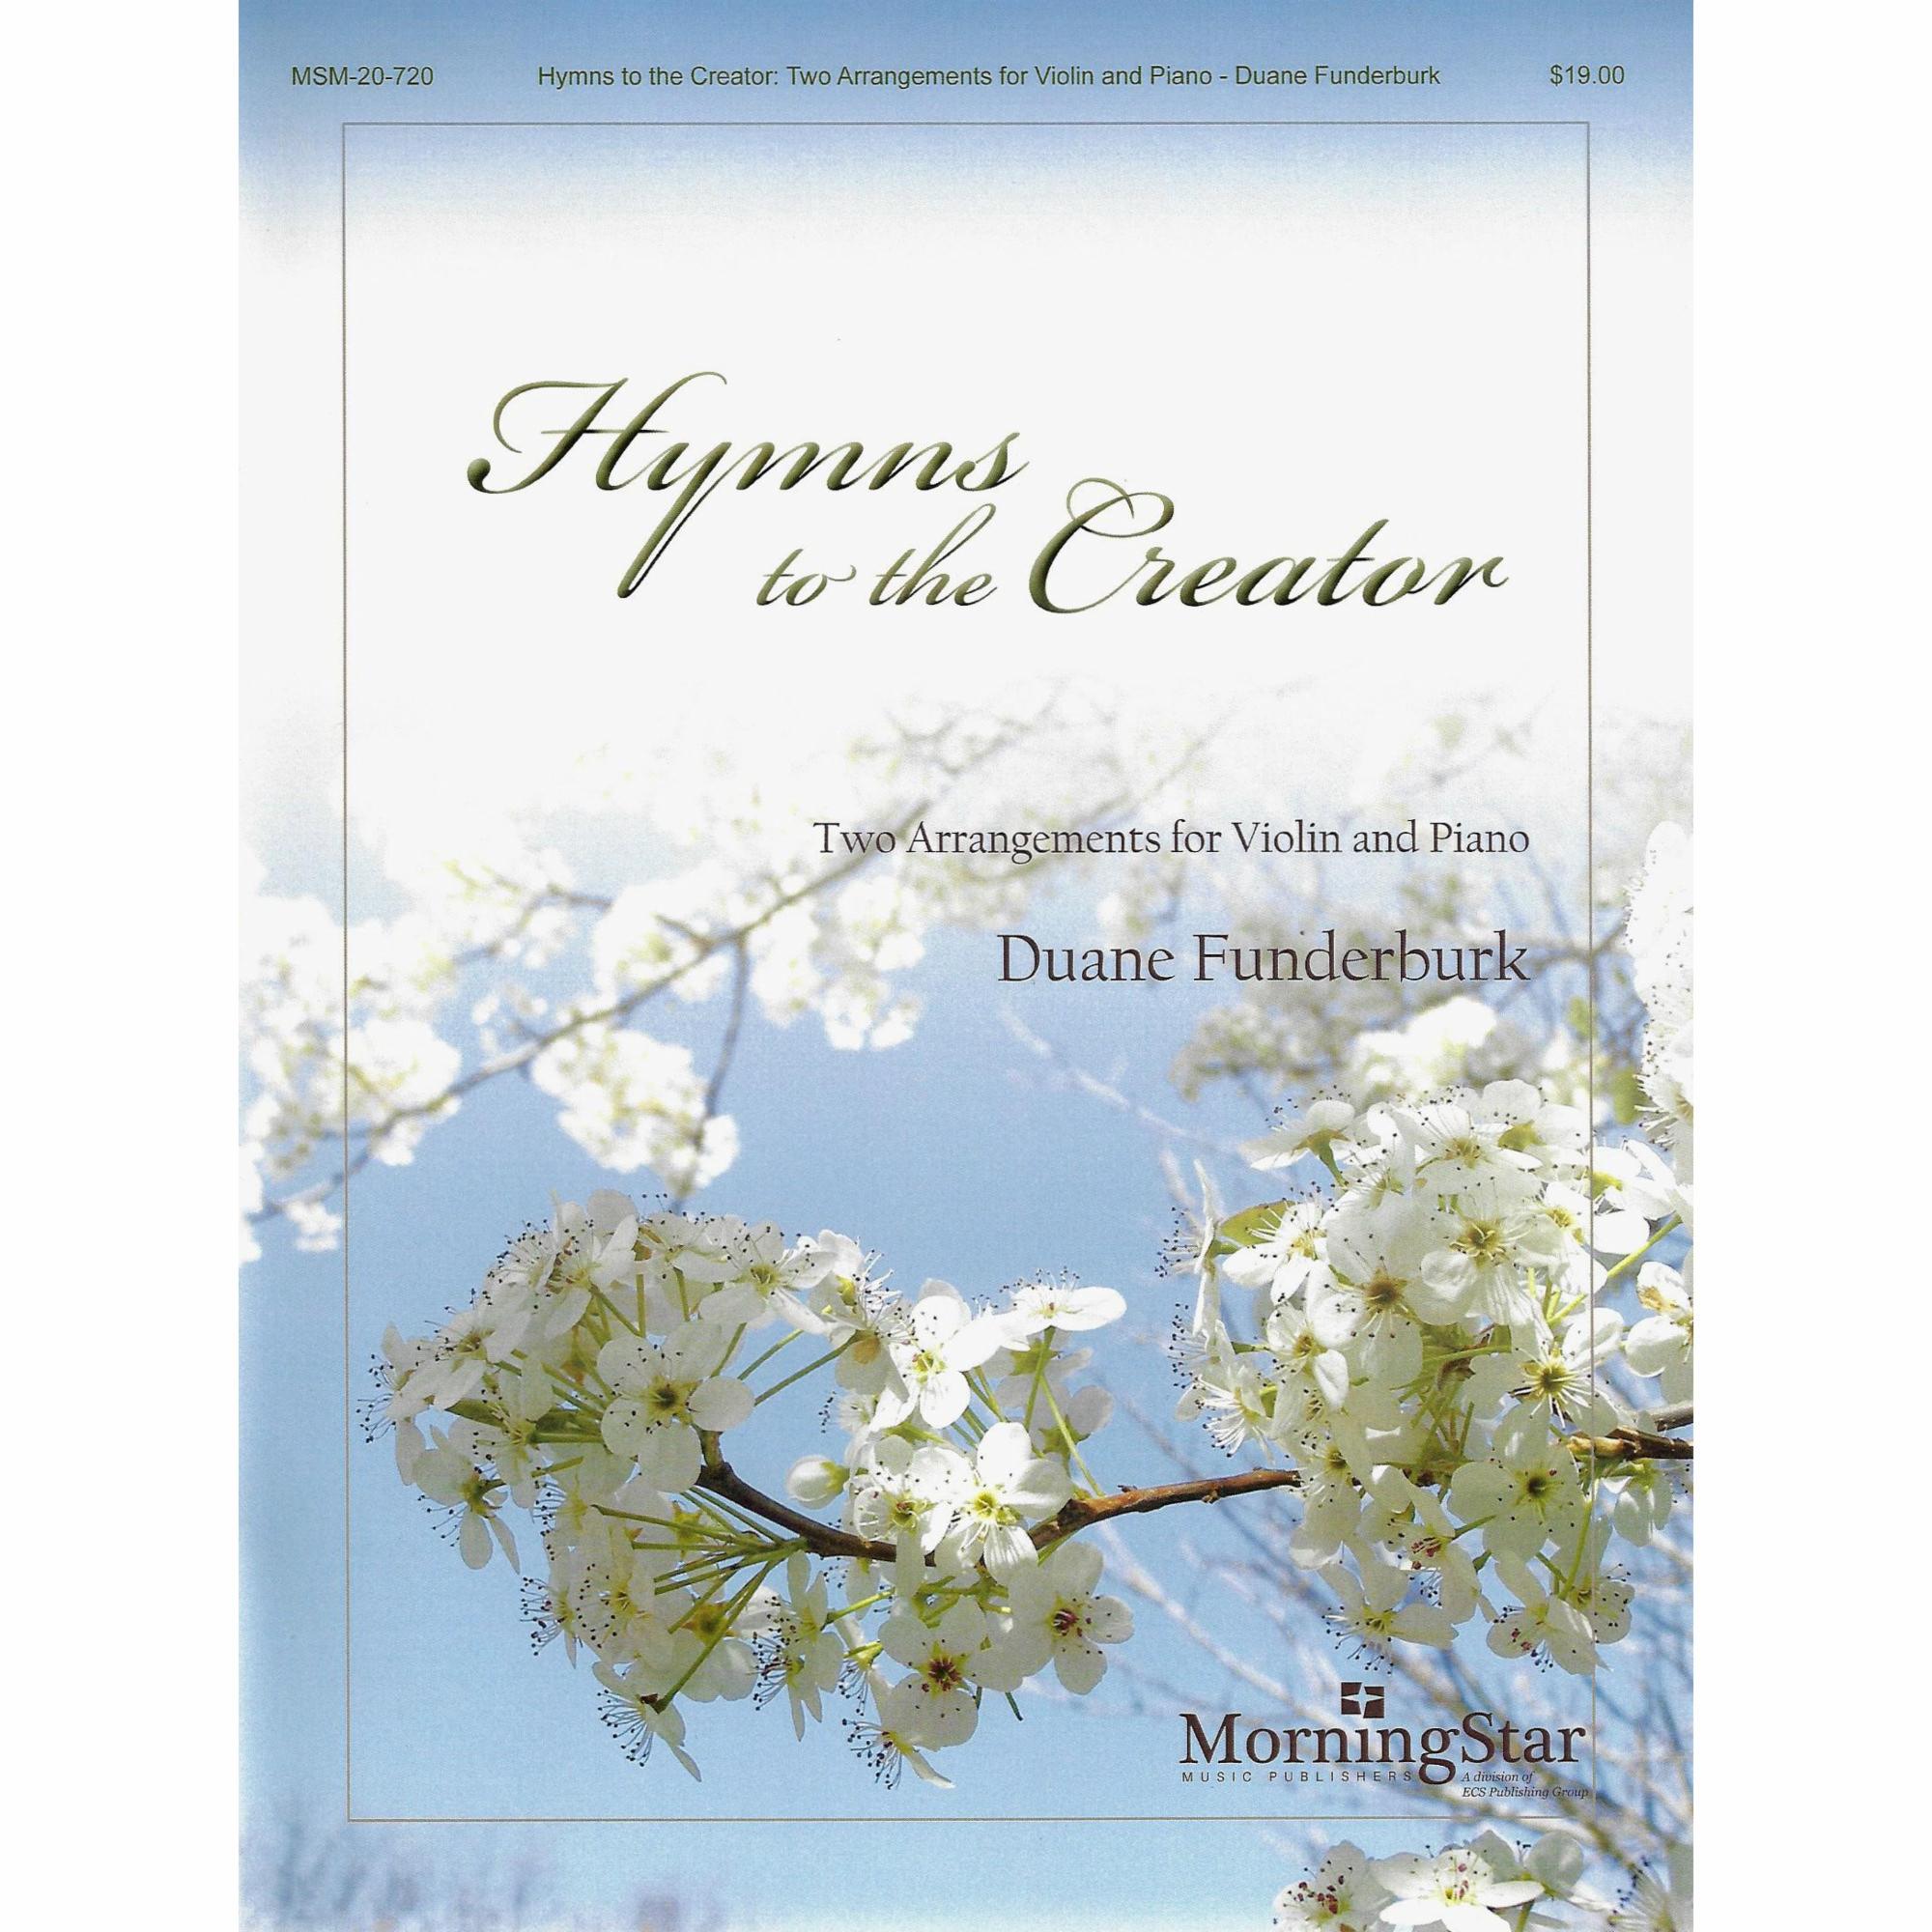 Hymns to the Creator for Violin and Piano